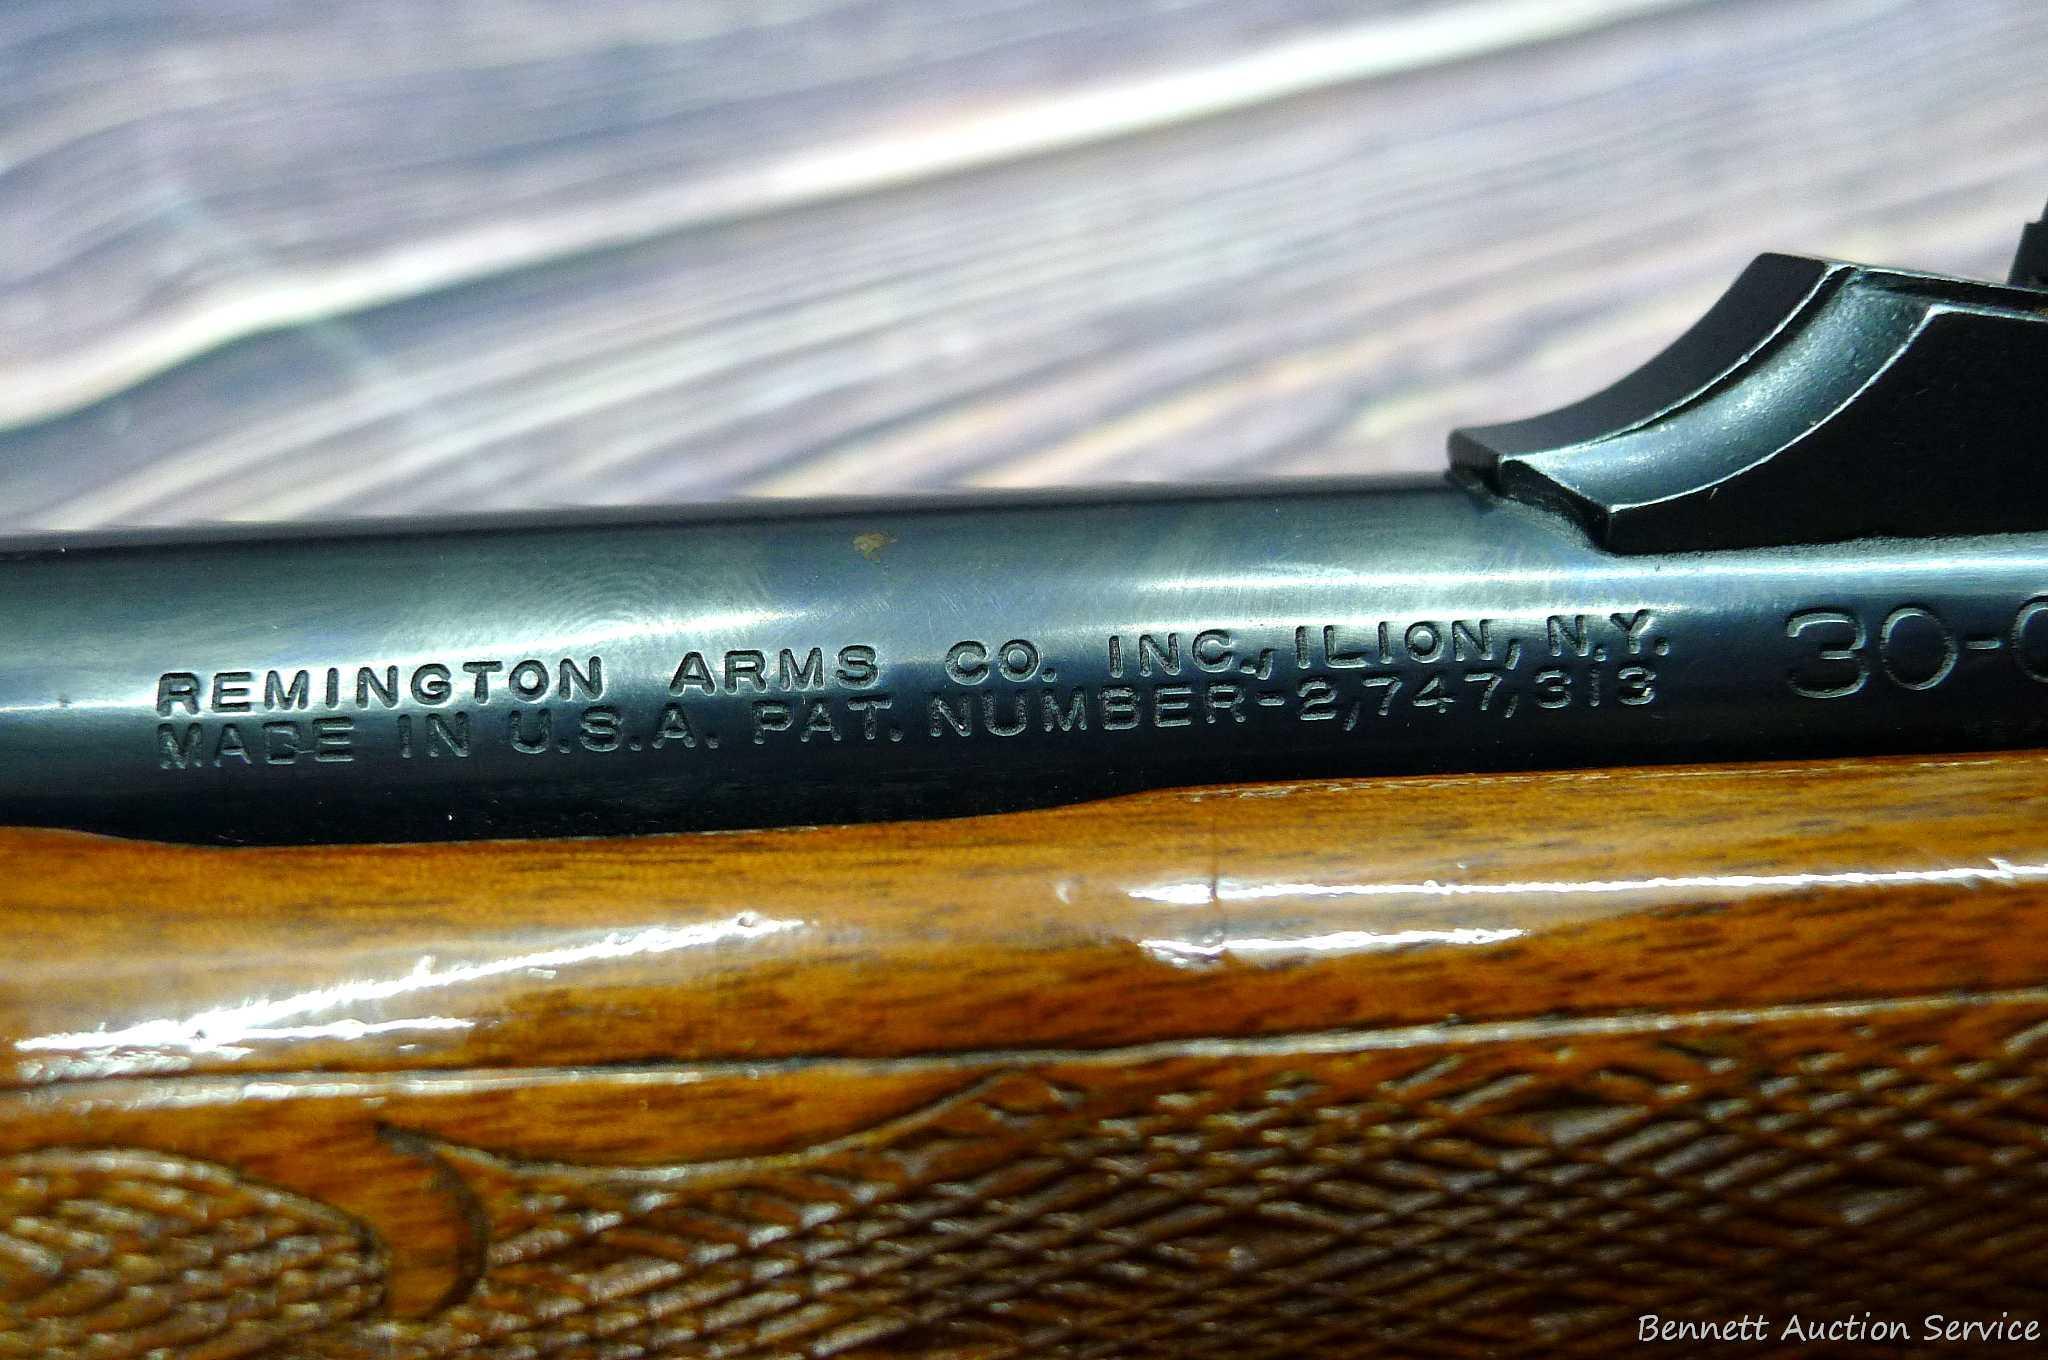 Remington Model 742 Woodsmaster semi-automatic rifle in .30-06 is topped with a 3-9 scope. Barrel is